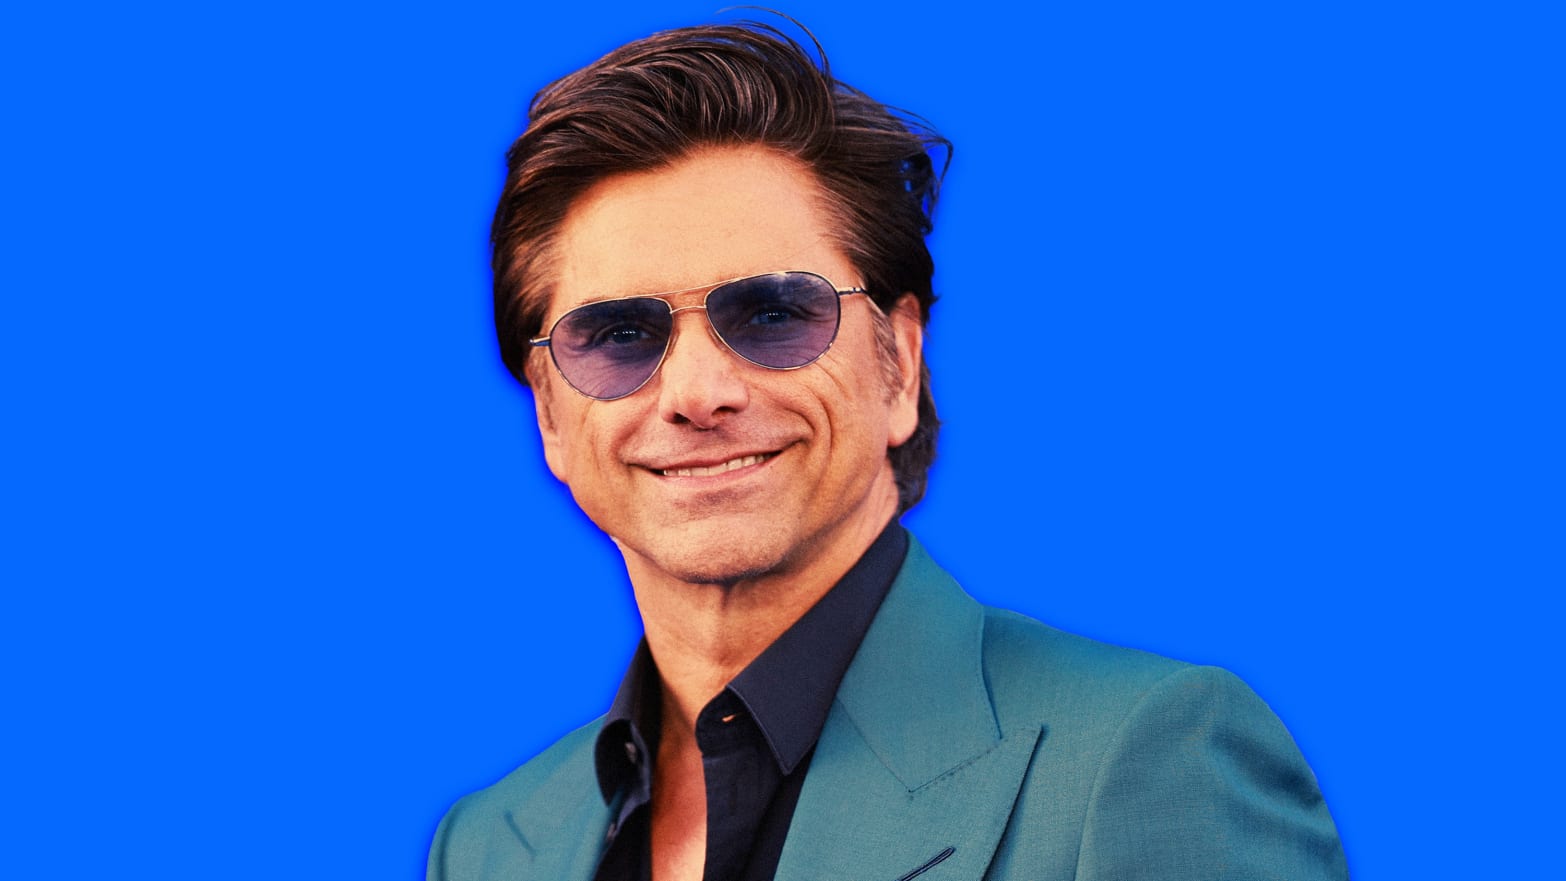 A photo illustration of actor John Stamos on a blue background.